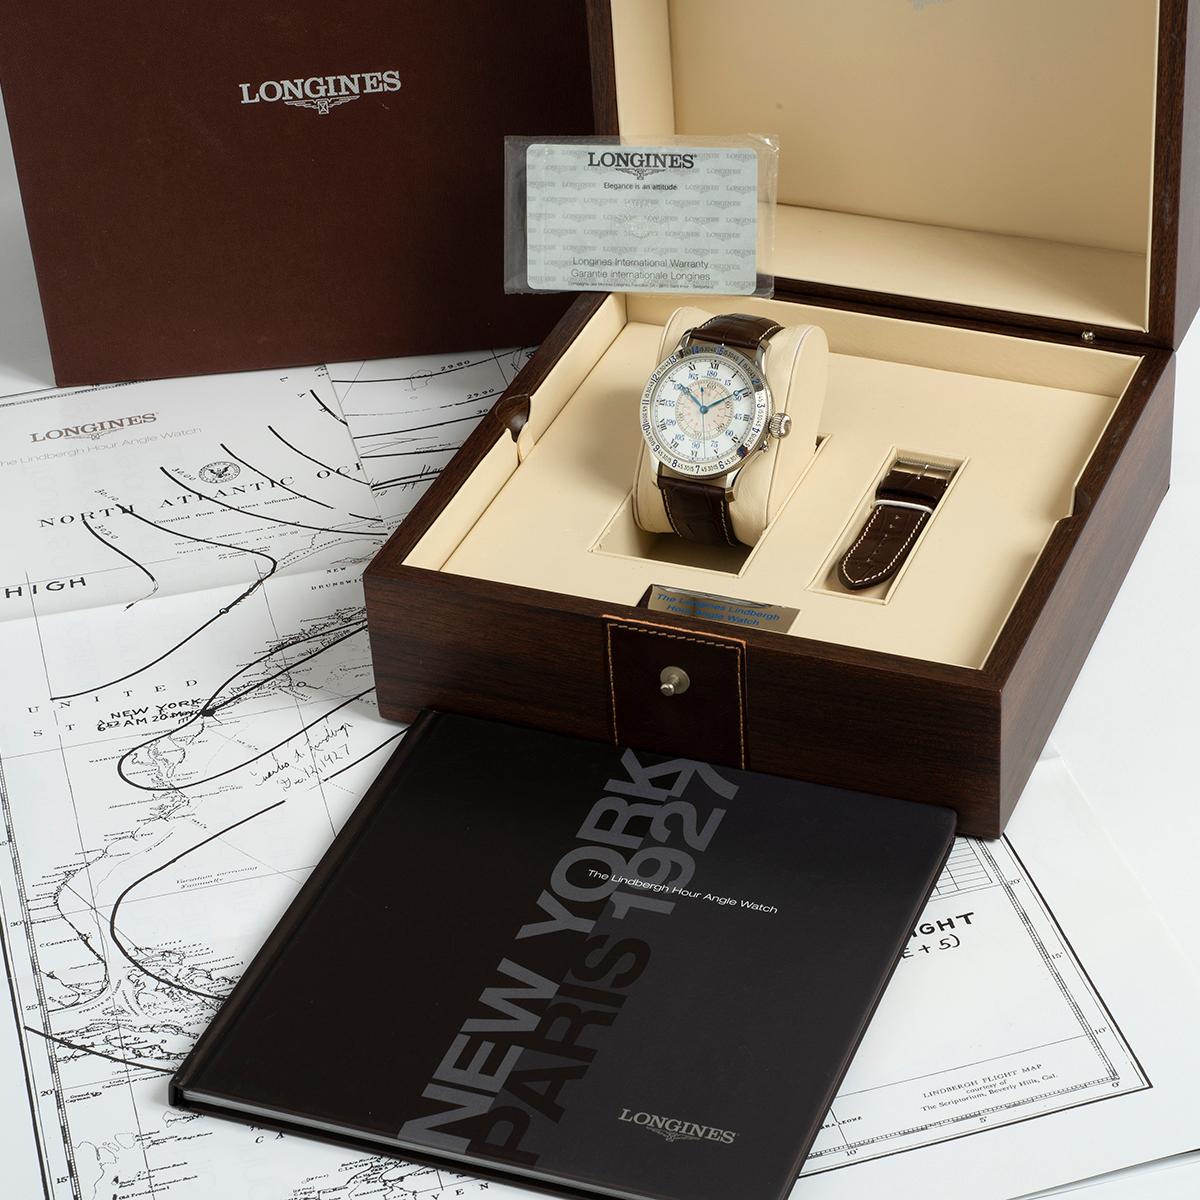 Our Longines Lindberg Hour Angle watch L2678.4 with steel 47mm case with case opening to reveal the exhibition sapphire glass. A full set and presented in mint condition without significant signs of use, this Lindbergh comes with correct inner and